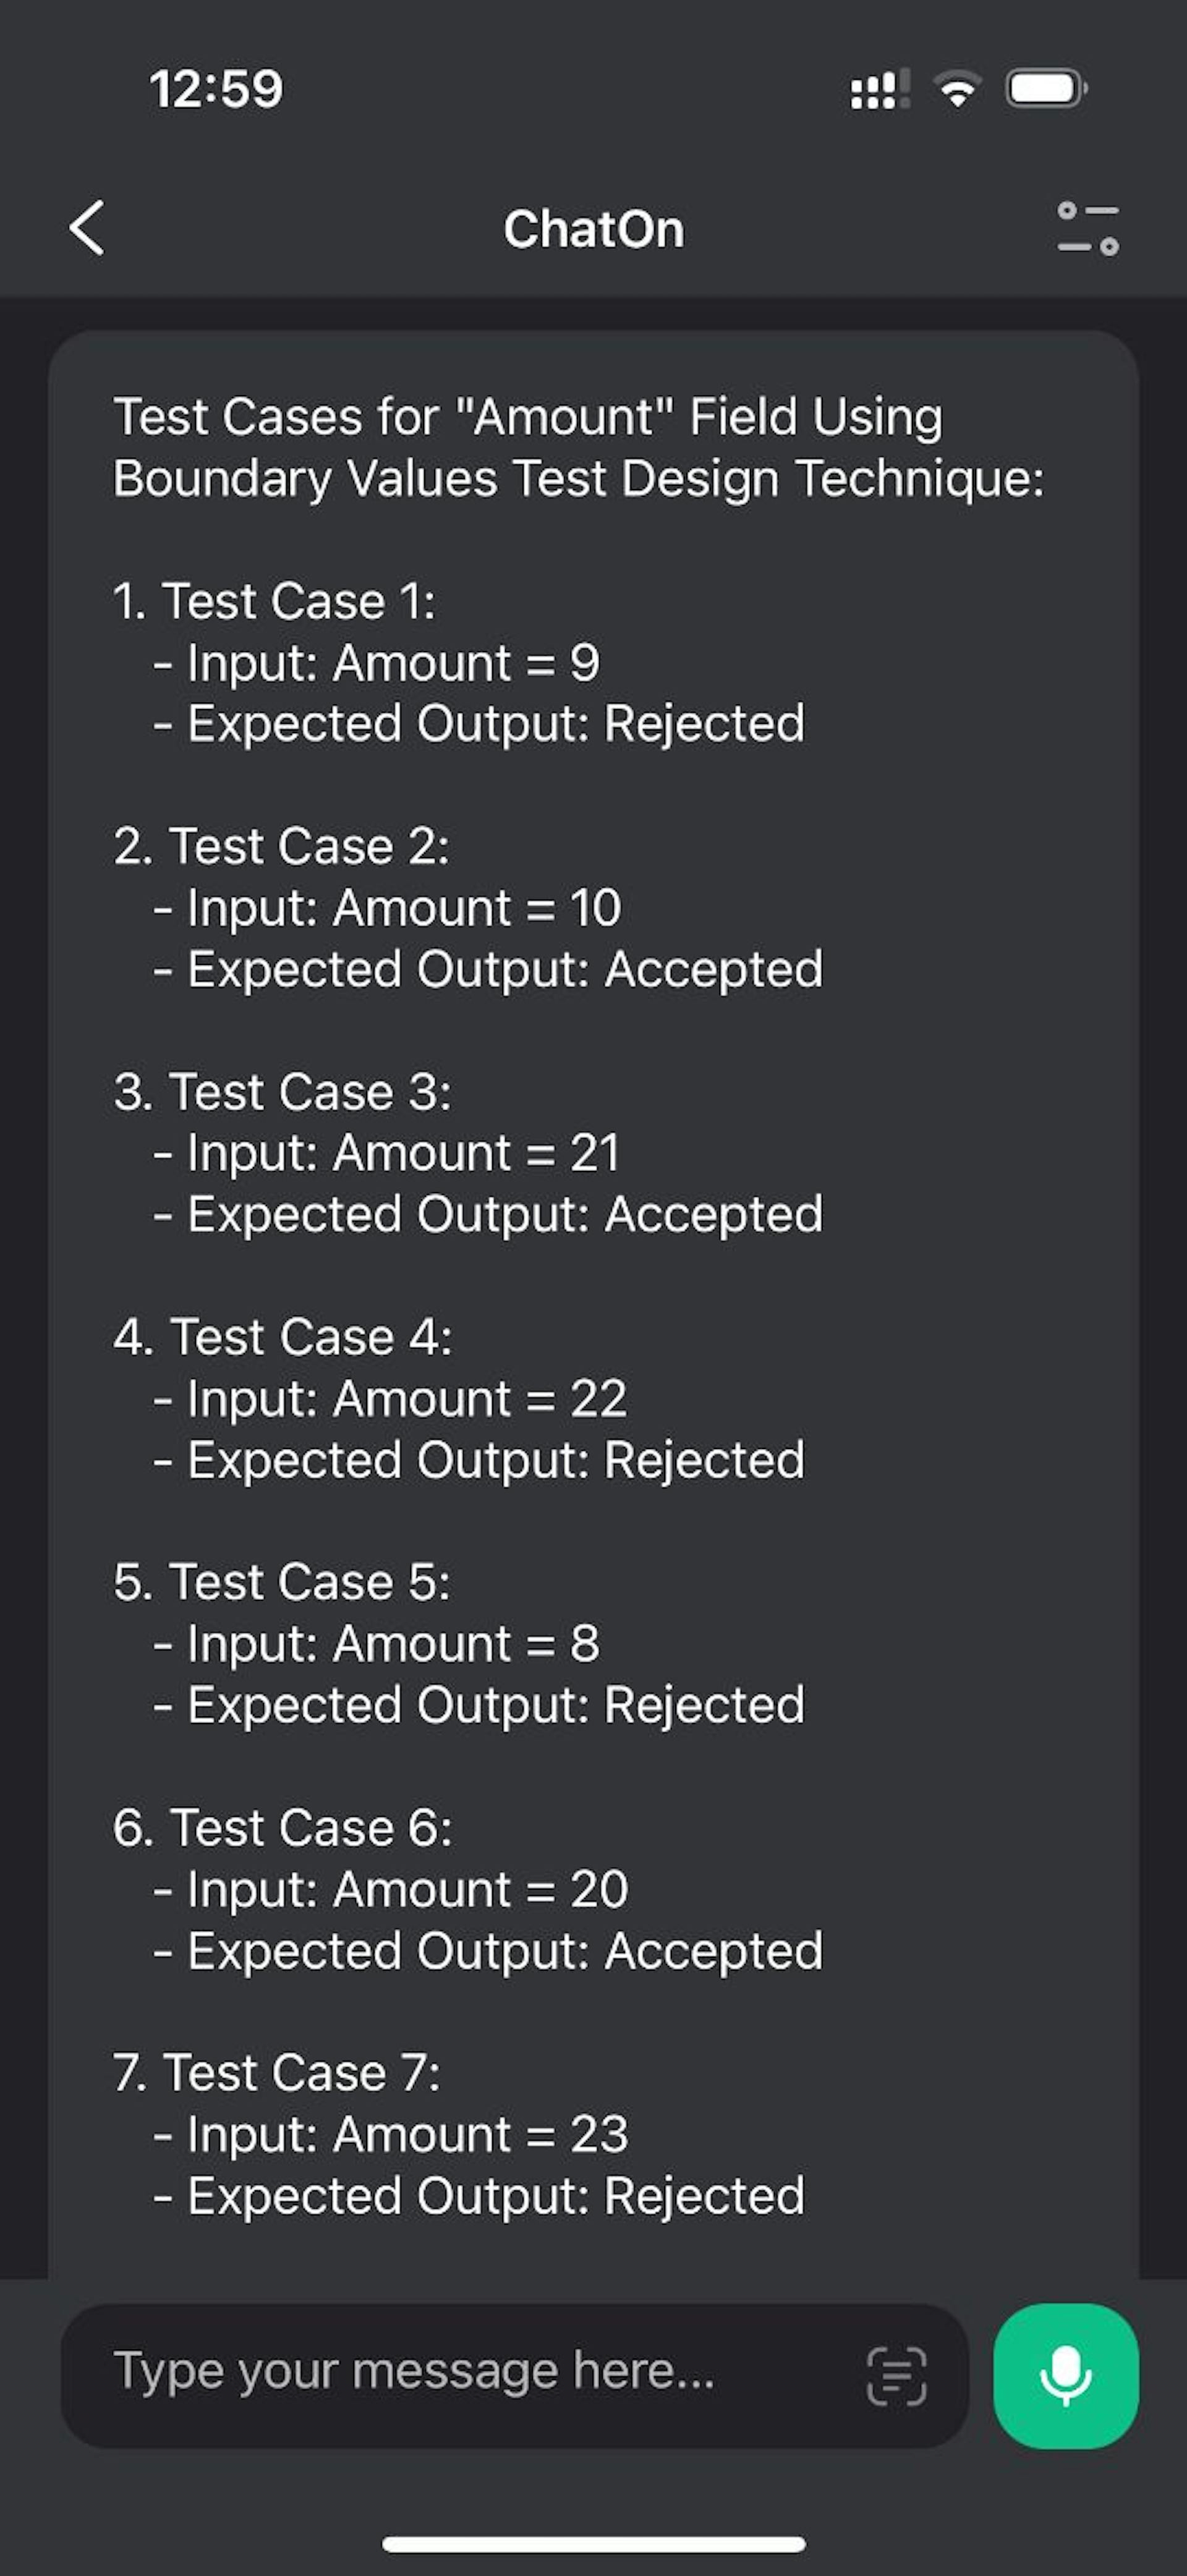 3) Test cases generated by ChatGPT